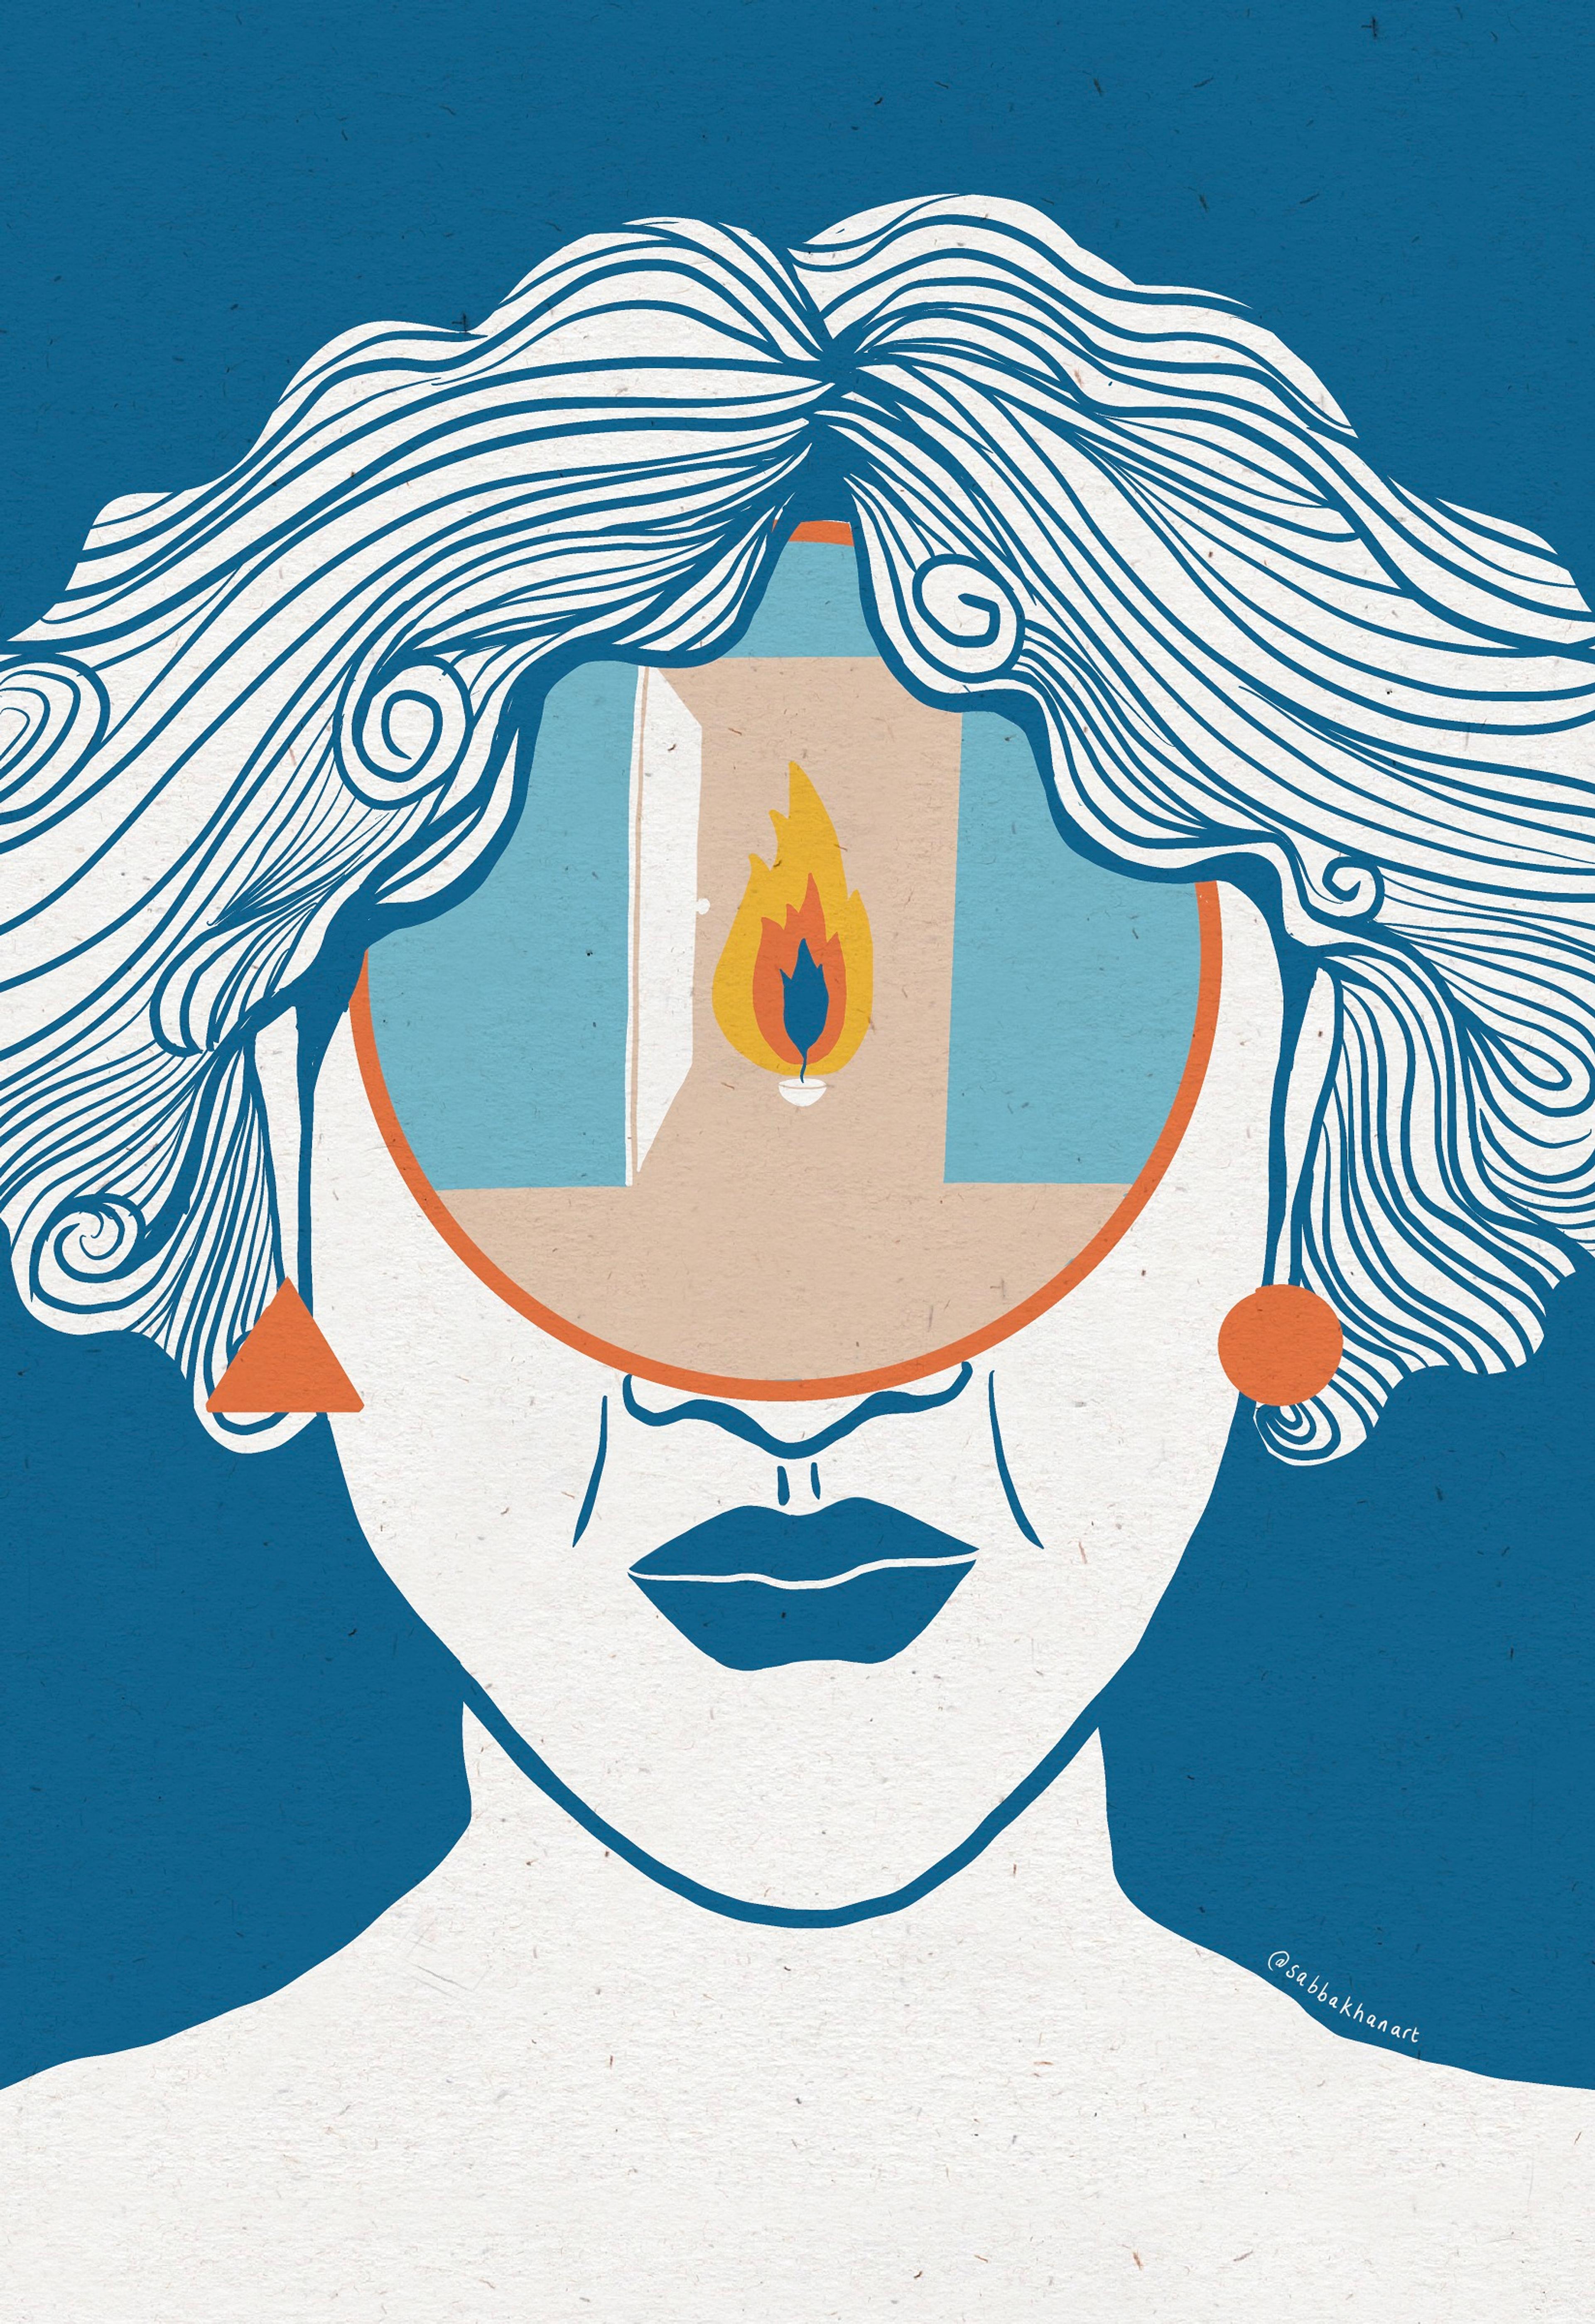 Illustration of a headwith a view into the mind that shows a burning flame